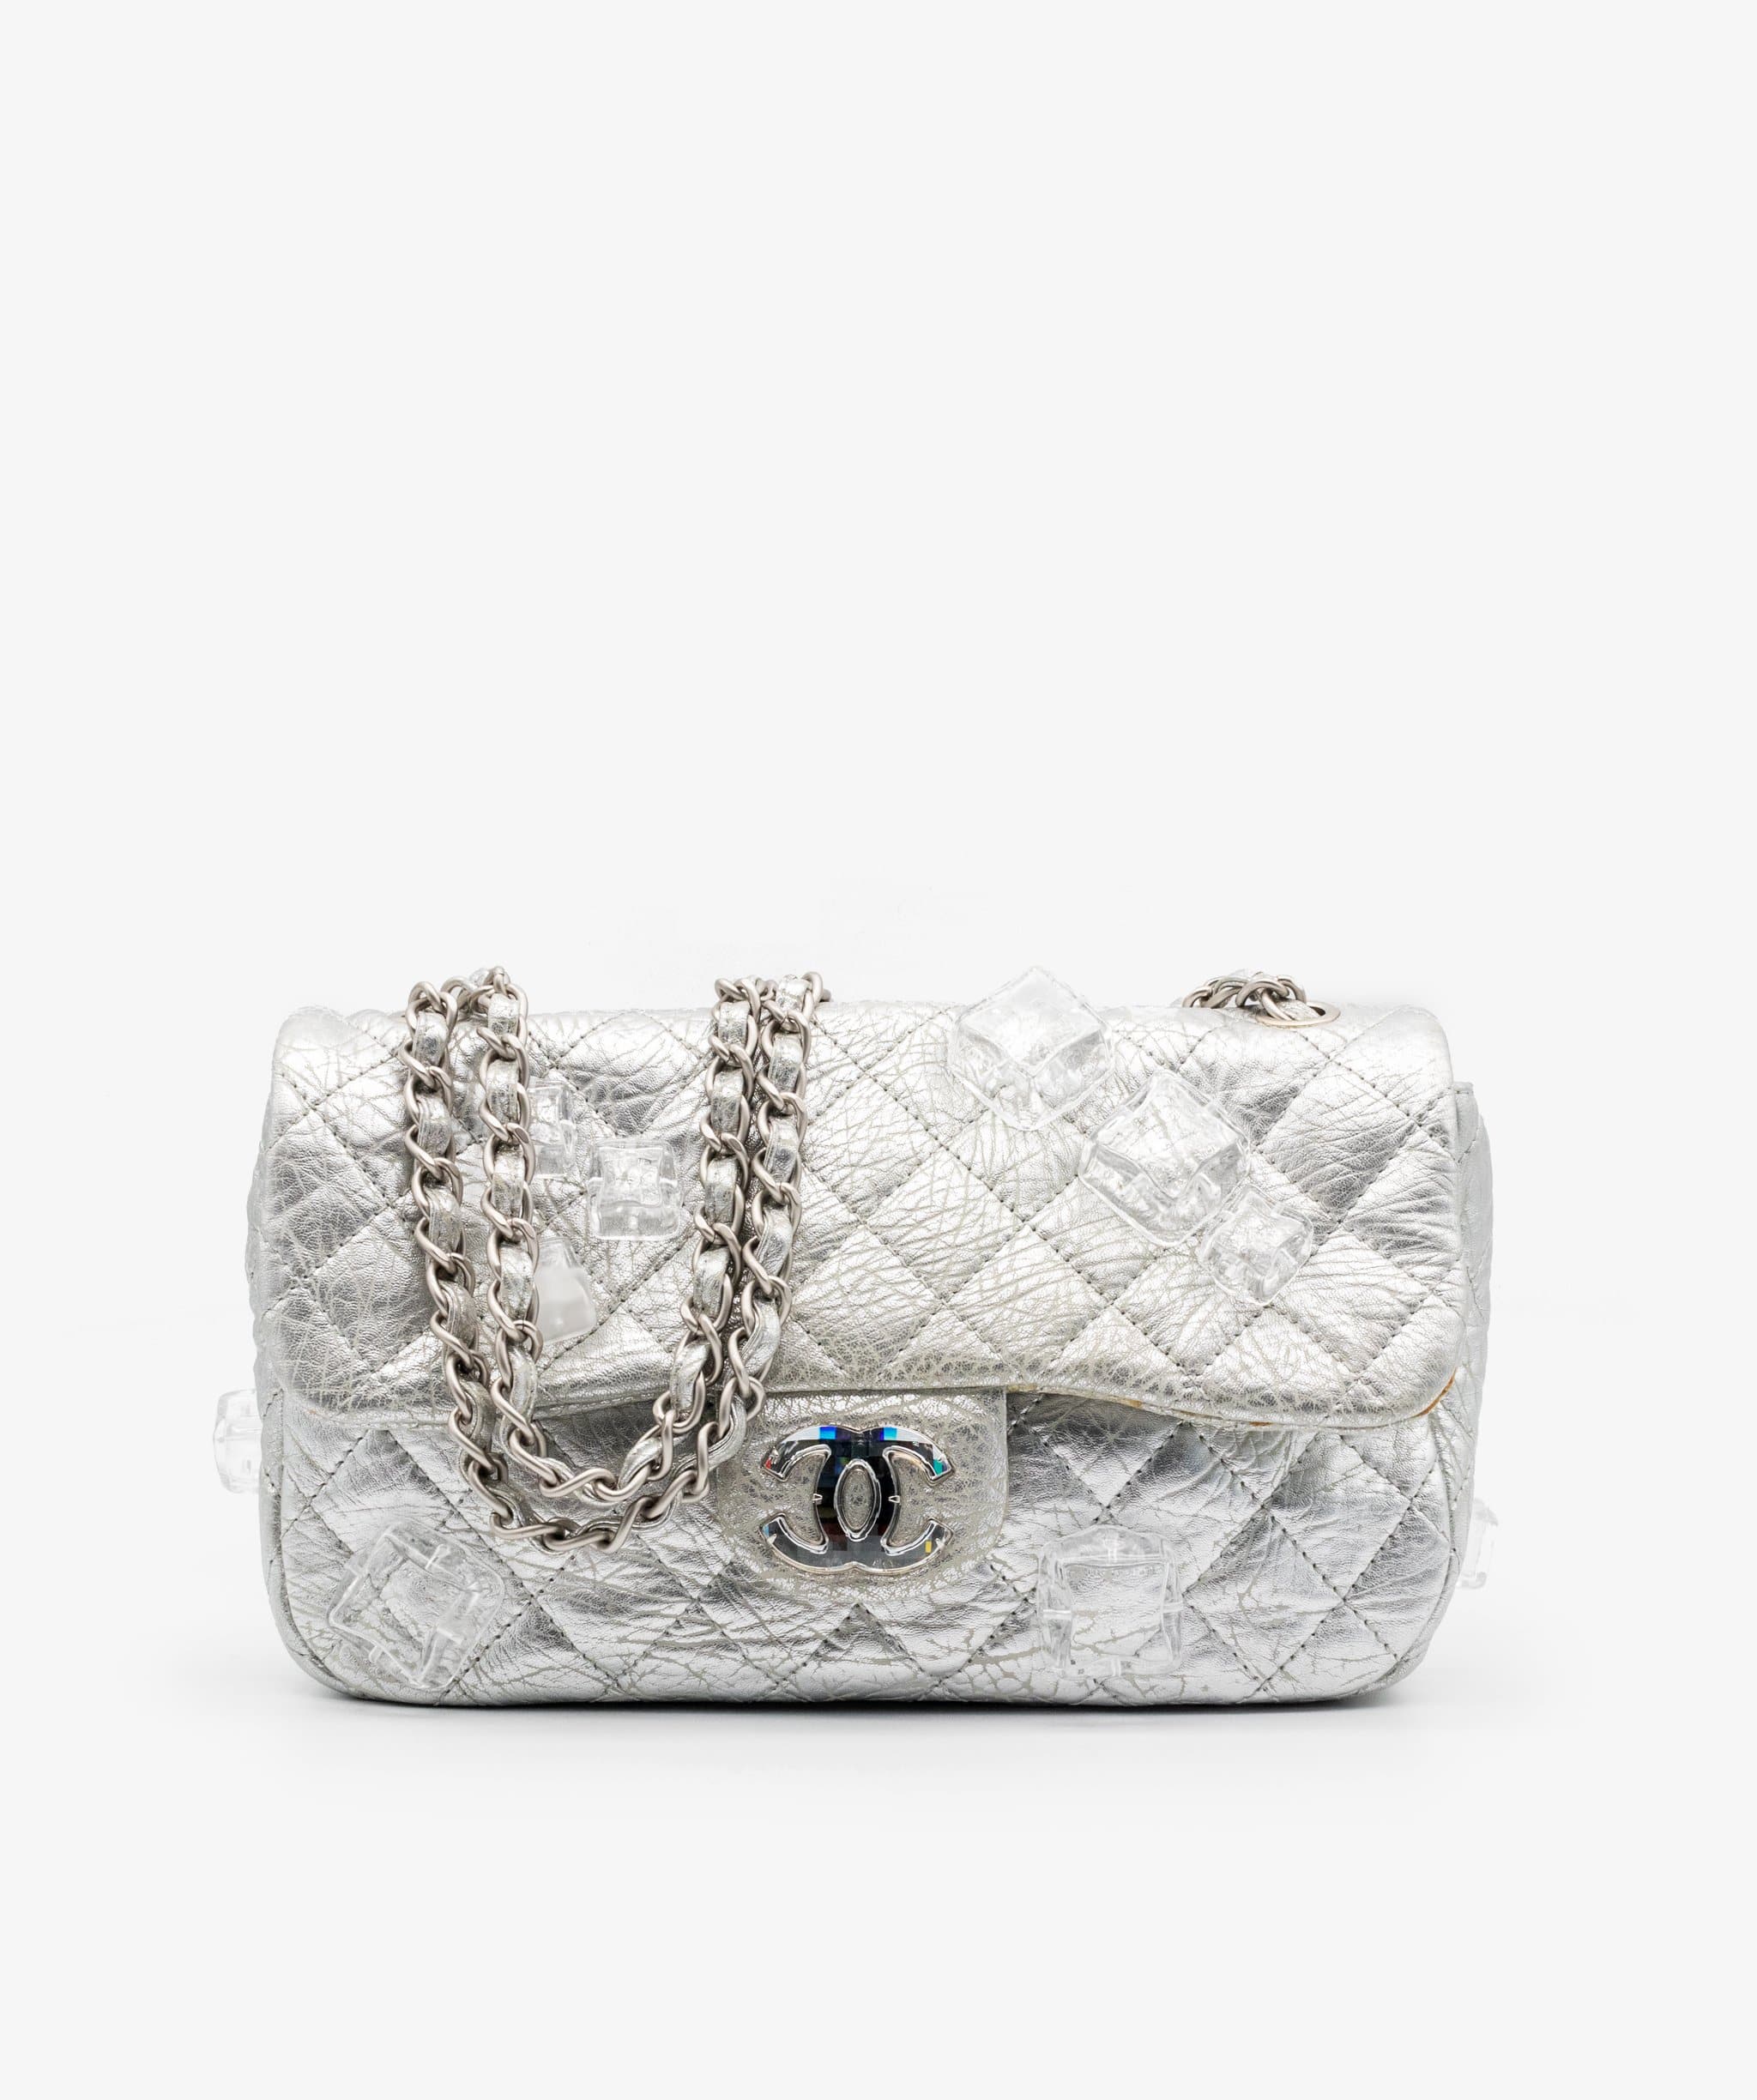 Chanel Silver Ice Cube Single Flap Bag